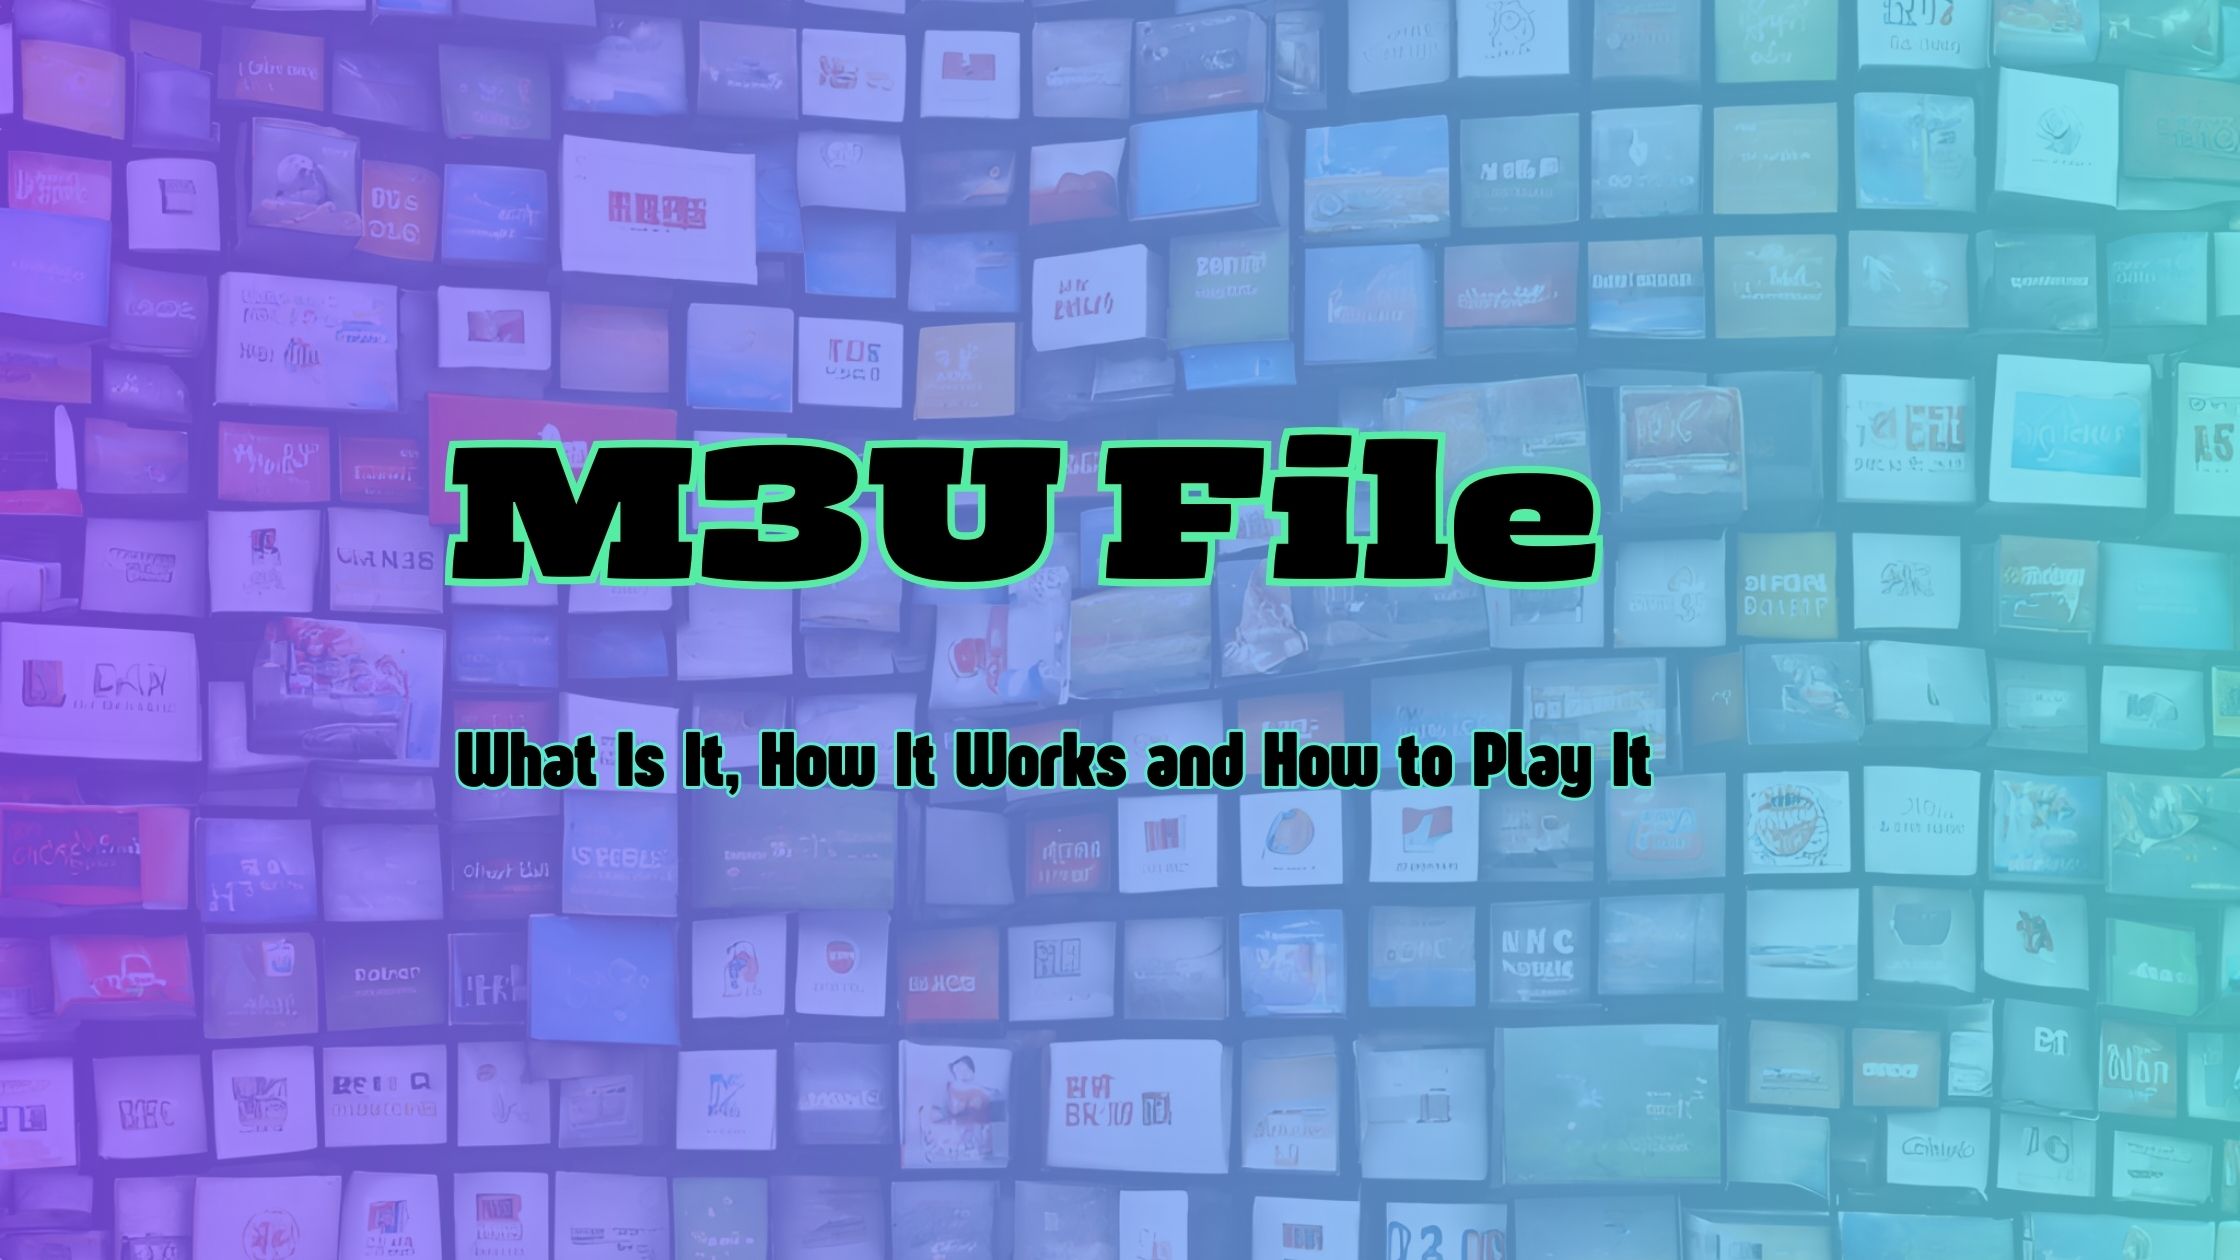 What is An M3U File?